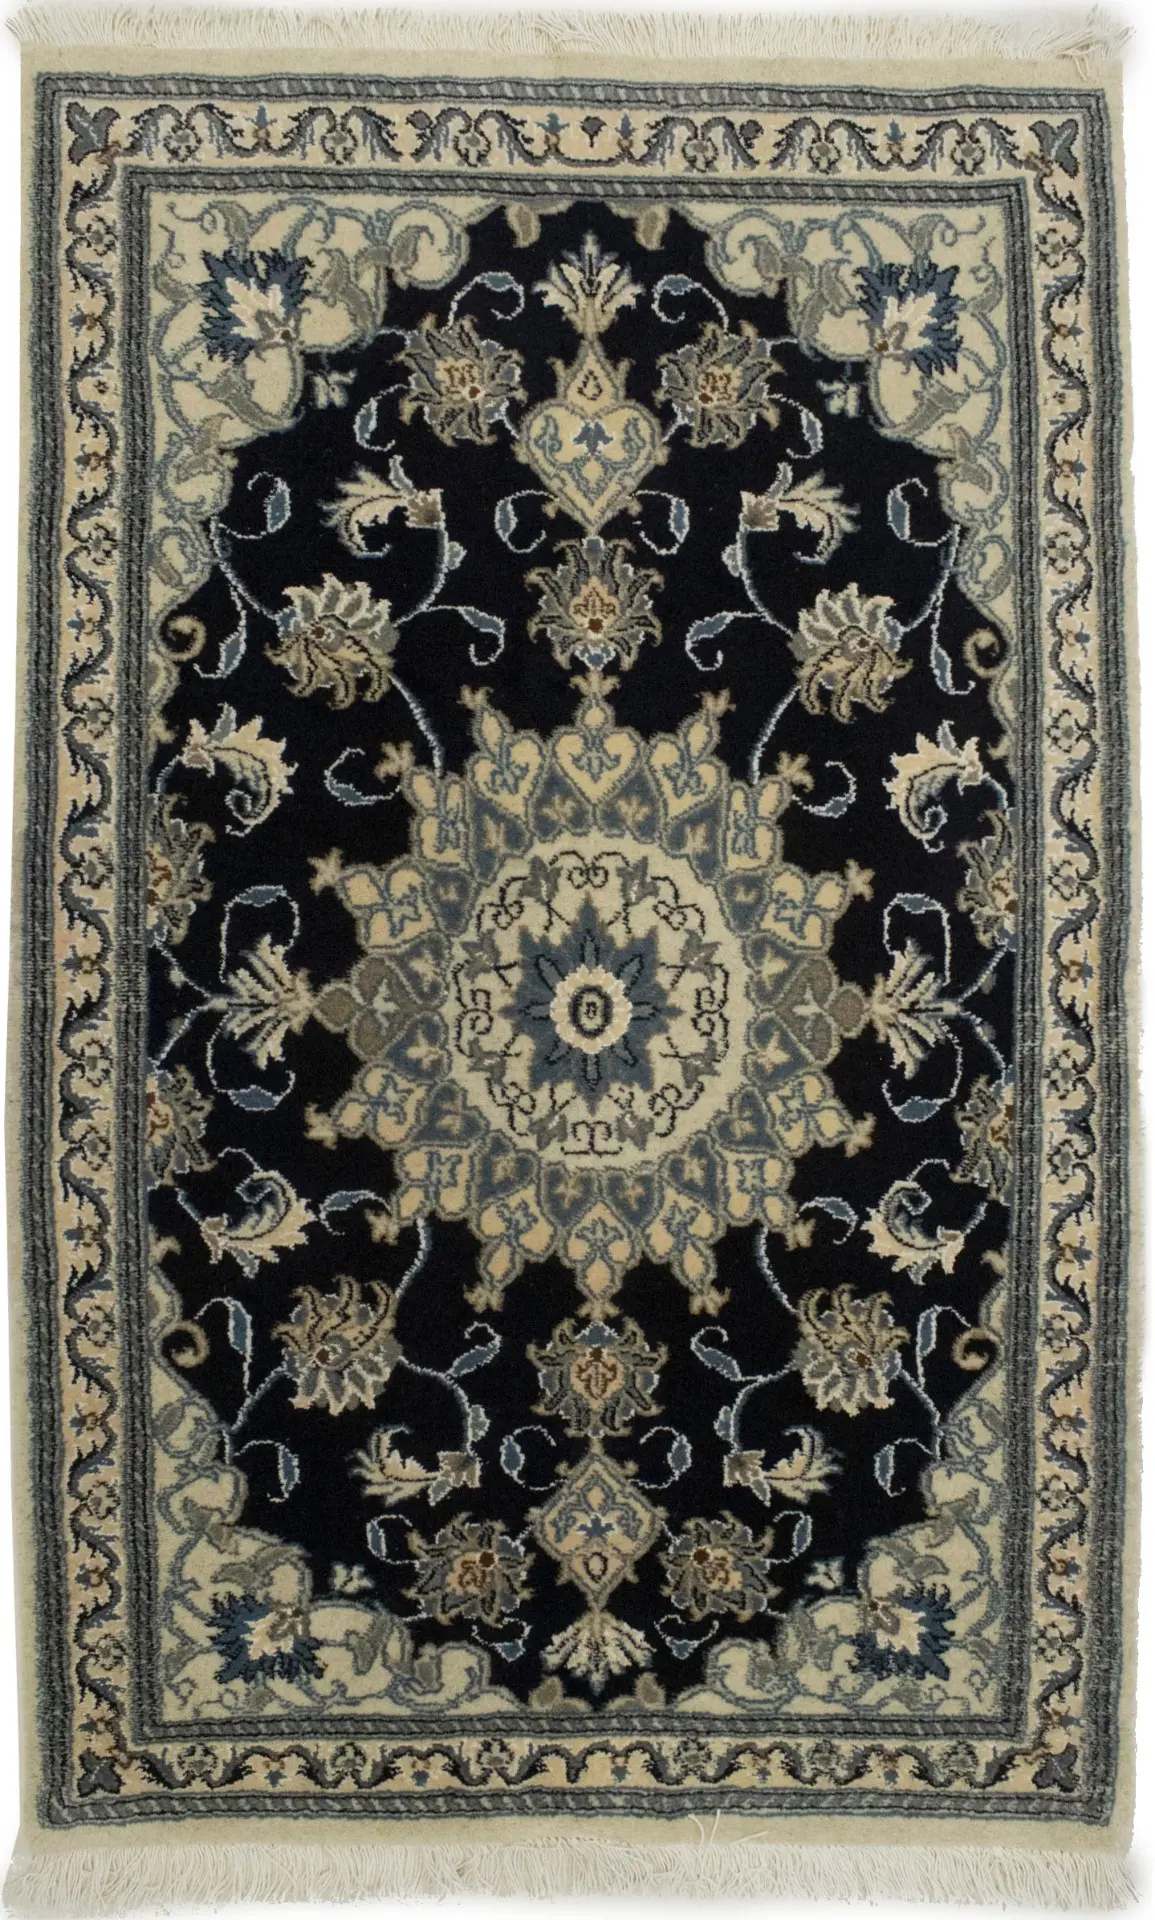 https://magicrugs.com/storage/import-products/rt-1720-1.webp